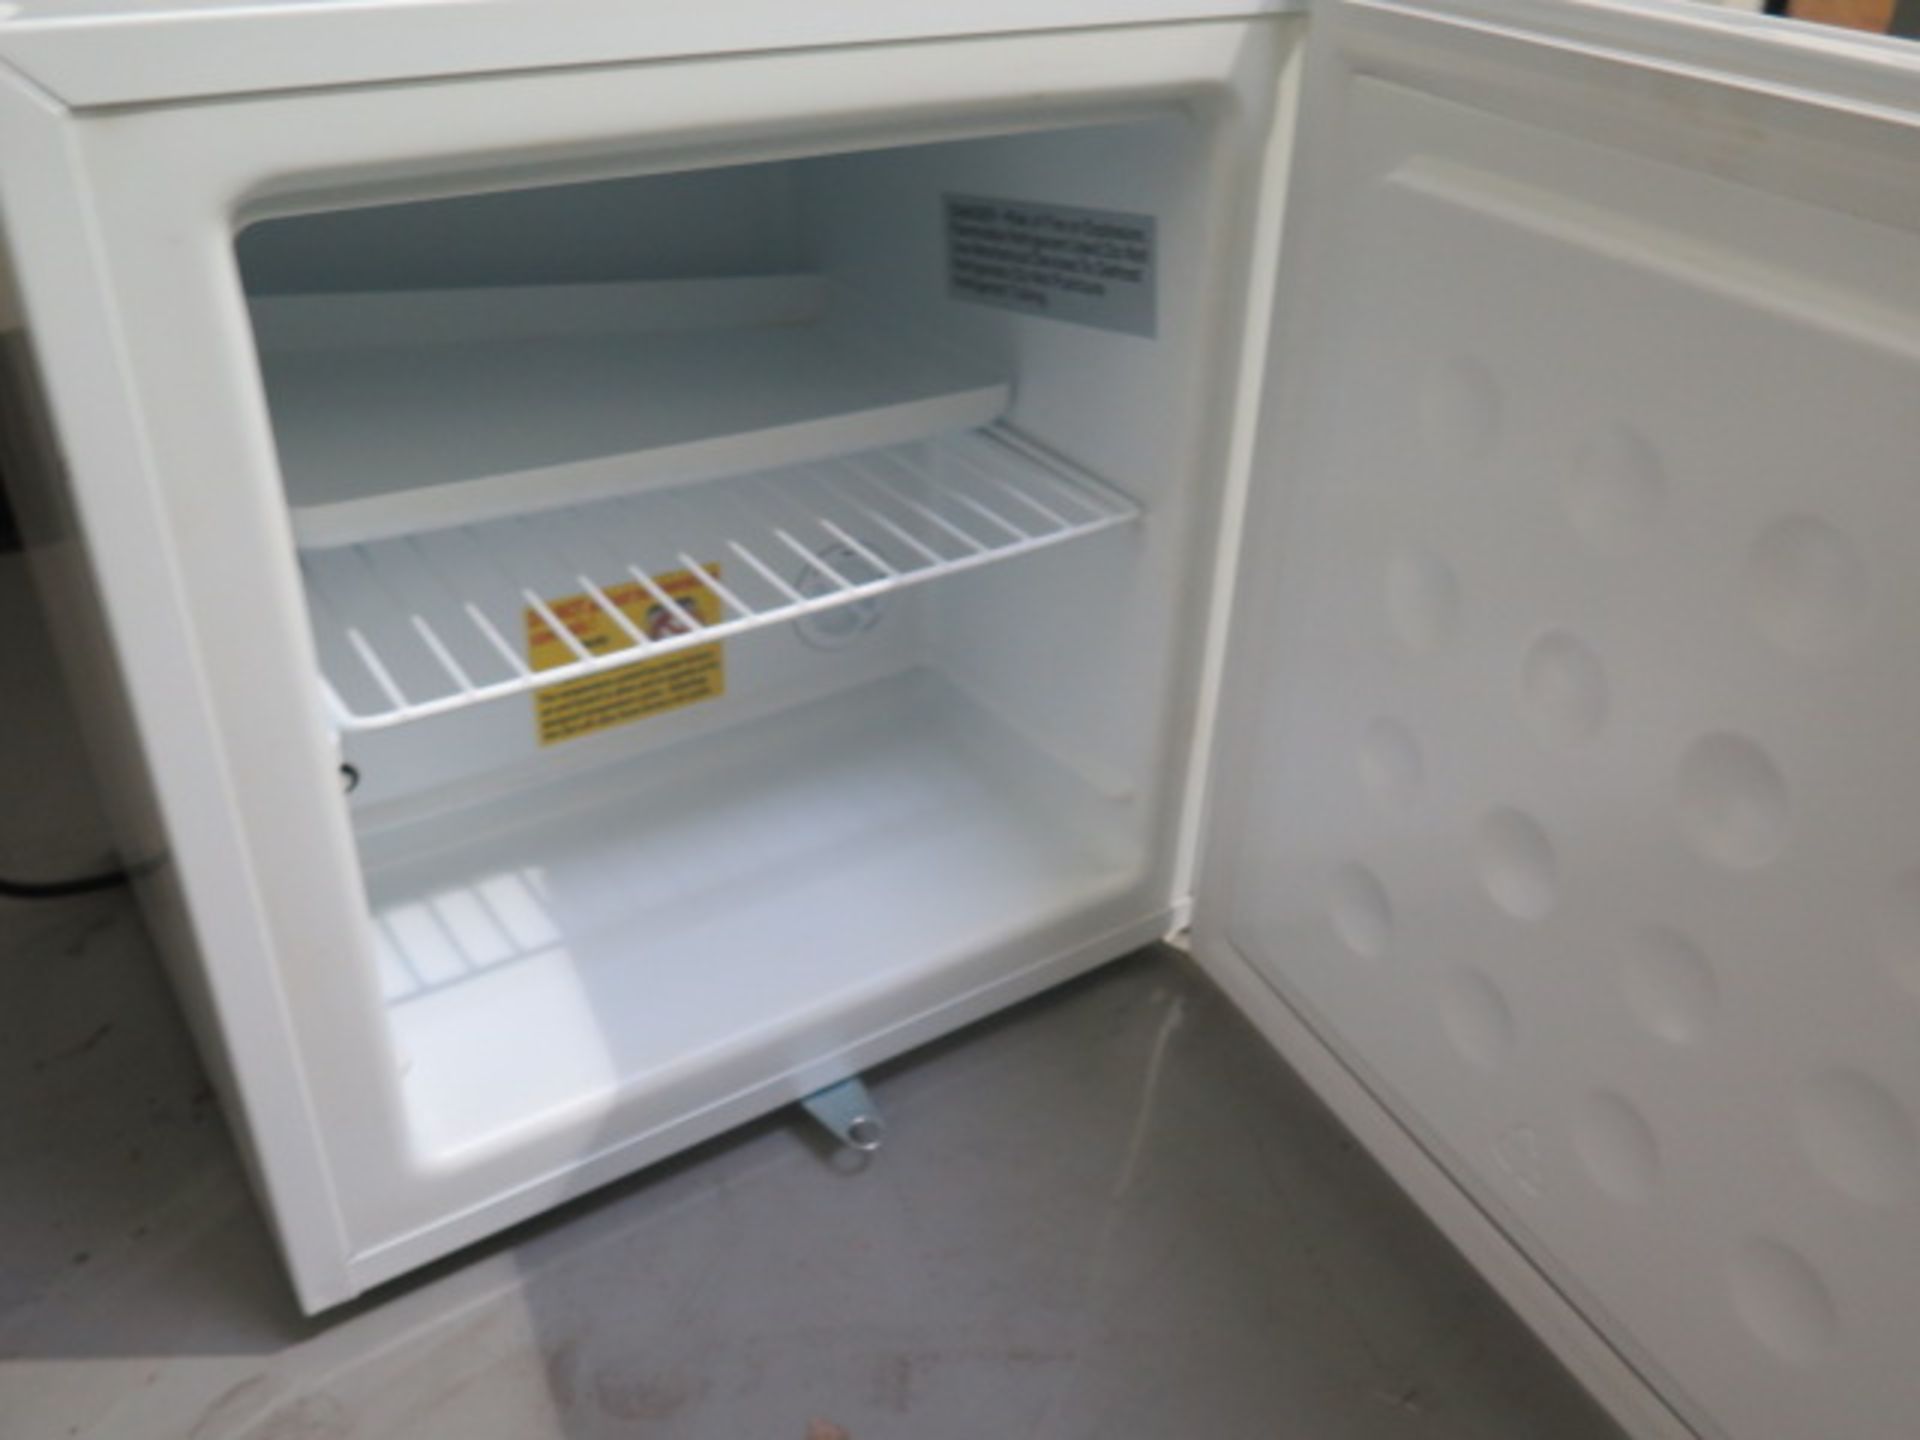 LabRepCo mdl. LH-2-FM Lab Refrigerator (SOLD AS-IS - NO WARRANTY) - Image 3 of 4